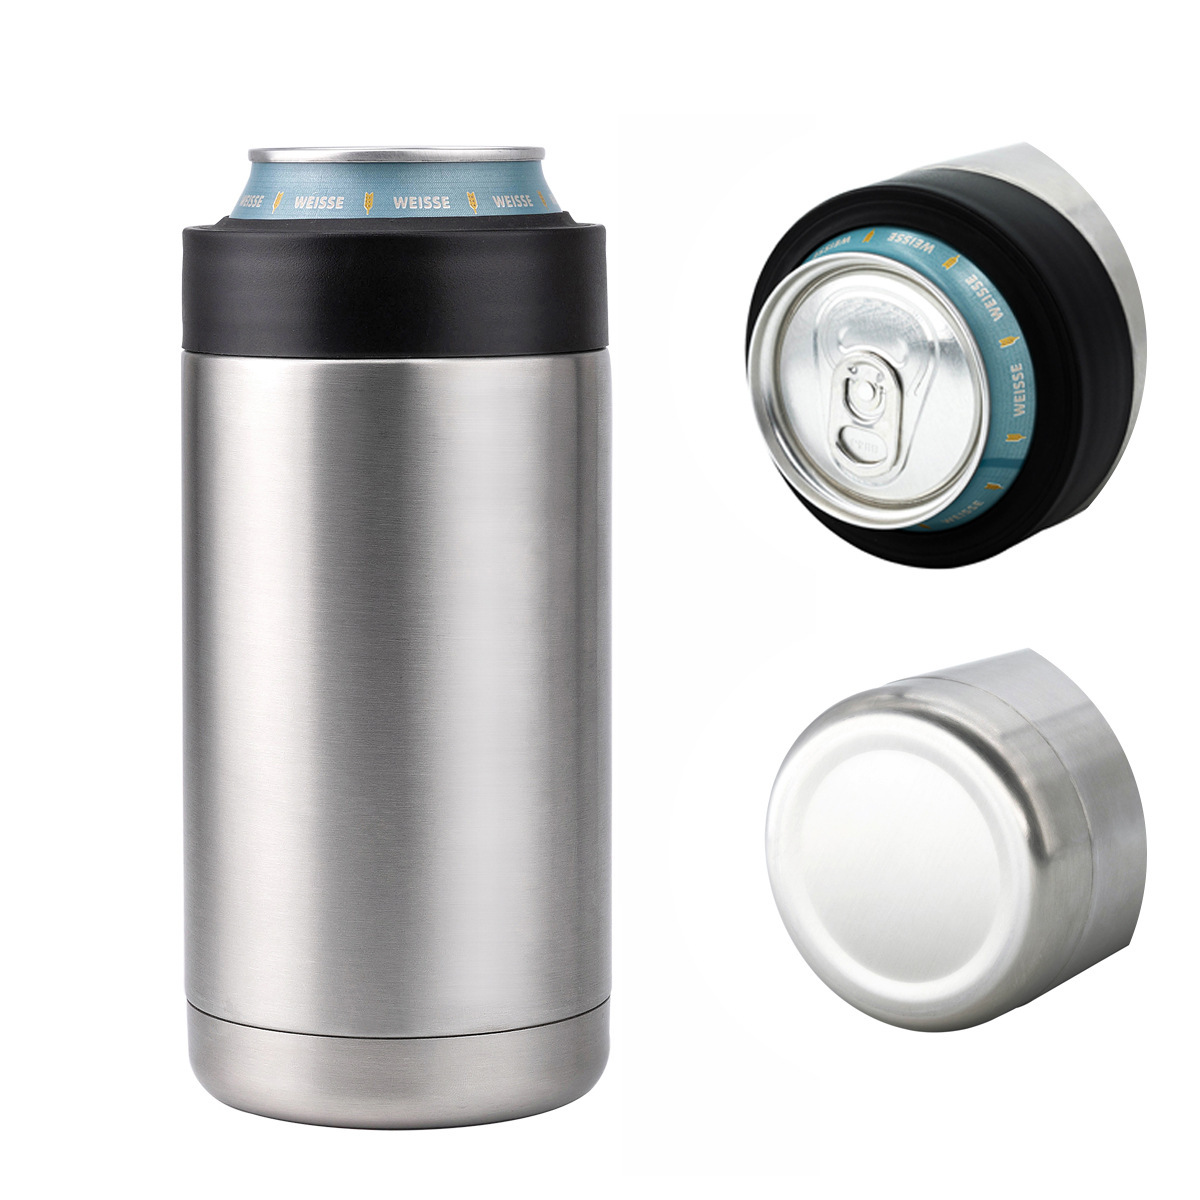 Double Wall Stainless Steel Car Beverage Holder Vacuum Insulated Can Cooler Holder Outdoor Sports Beer Holder